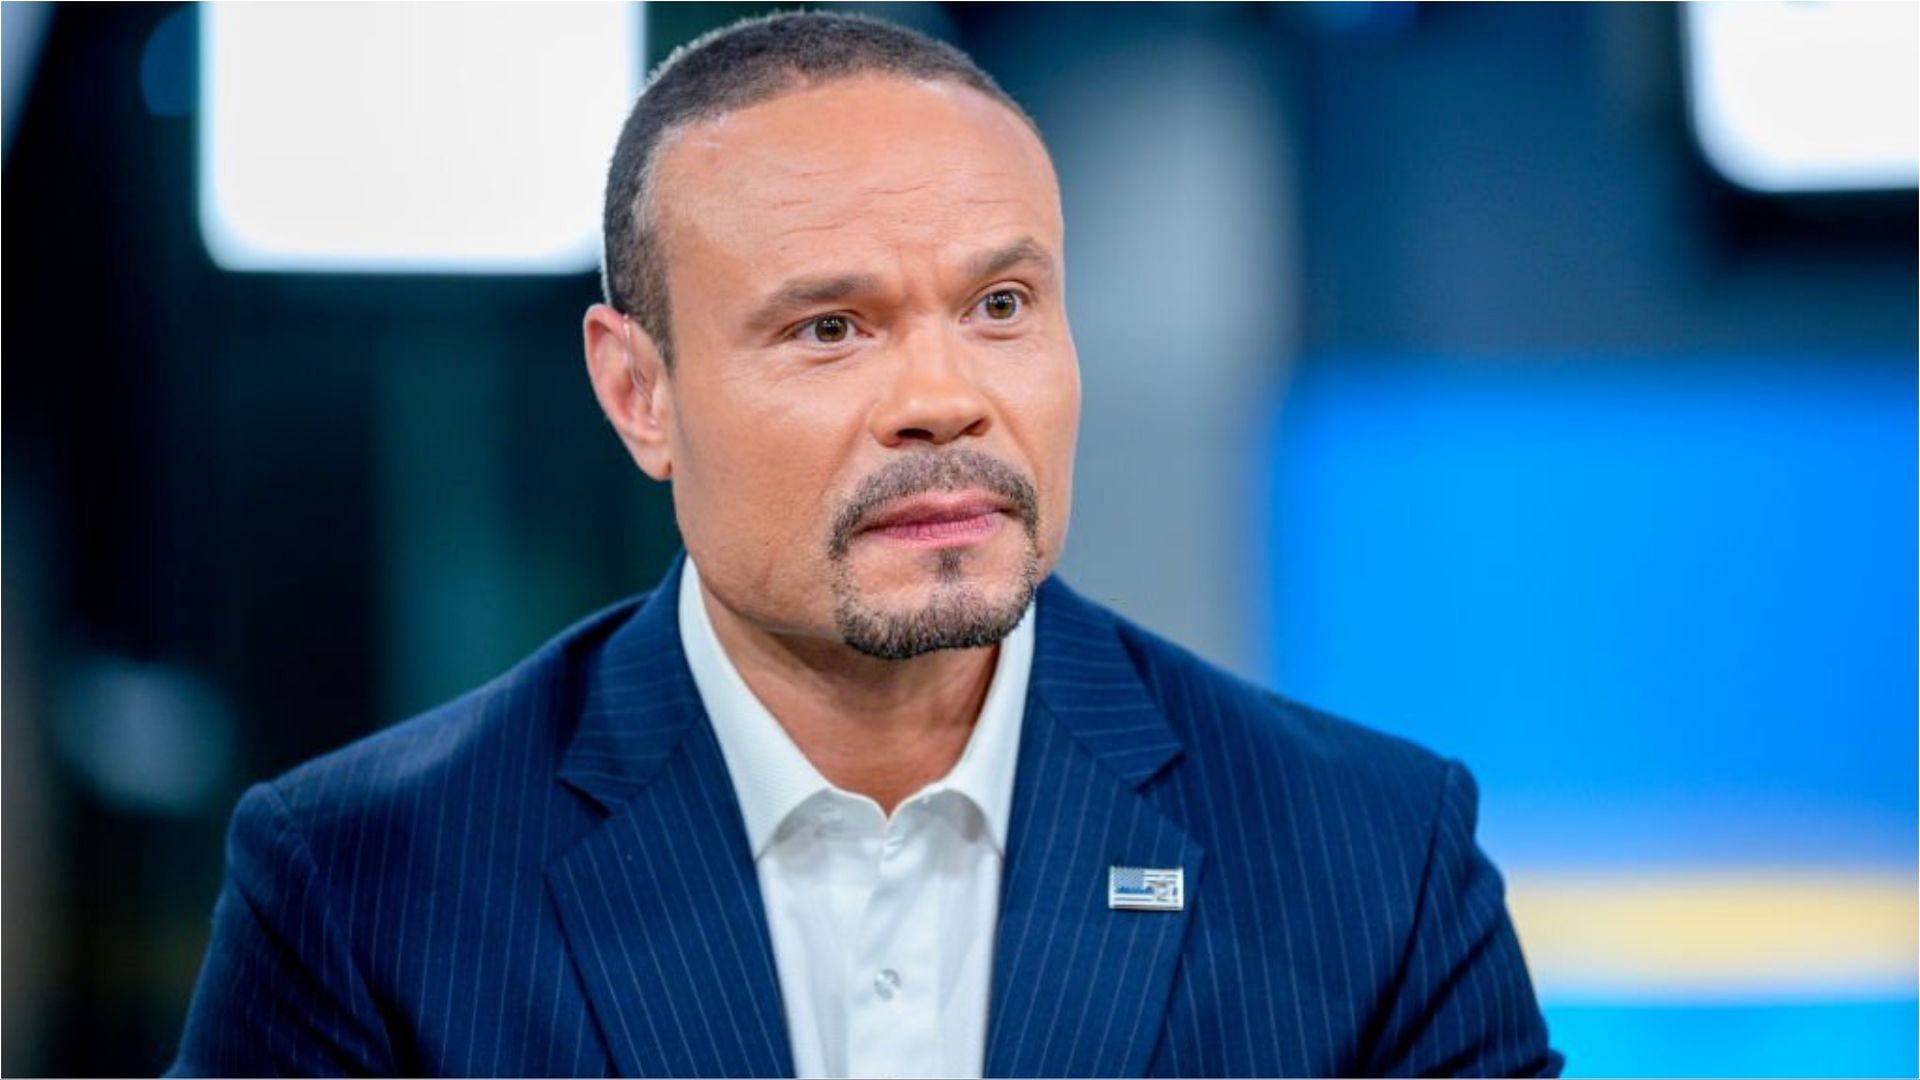 Dan Bongino joined Fox News in 2021 (Image via Roy Rochlin/Getty Images)